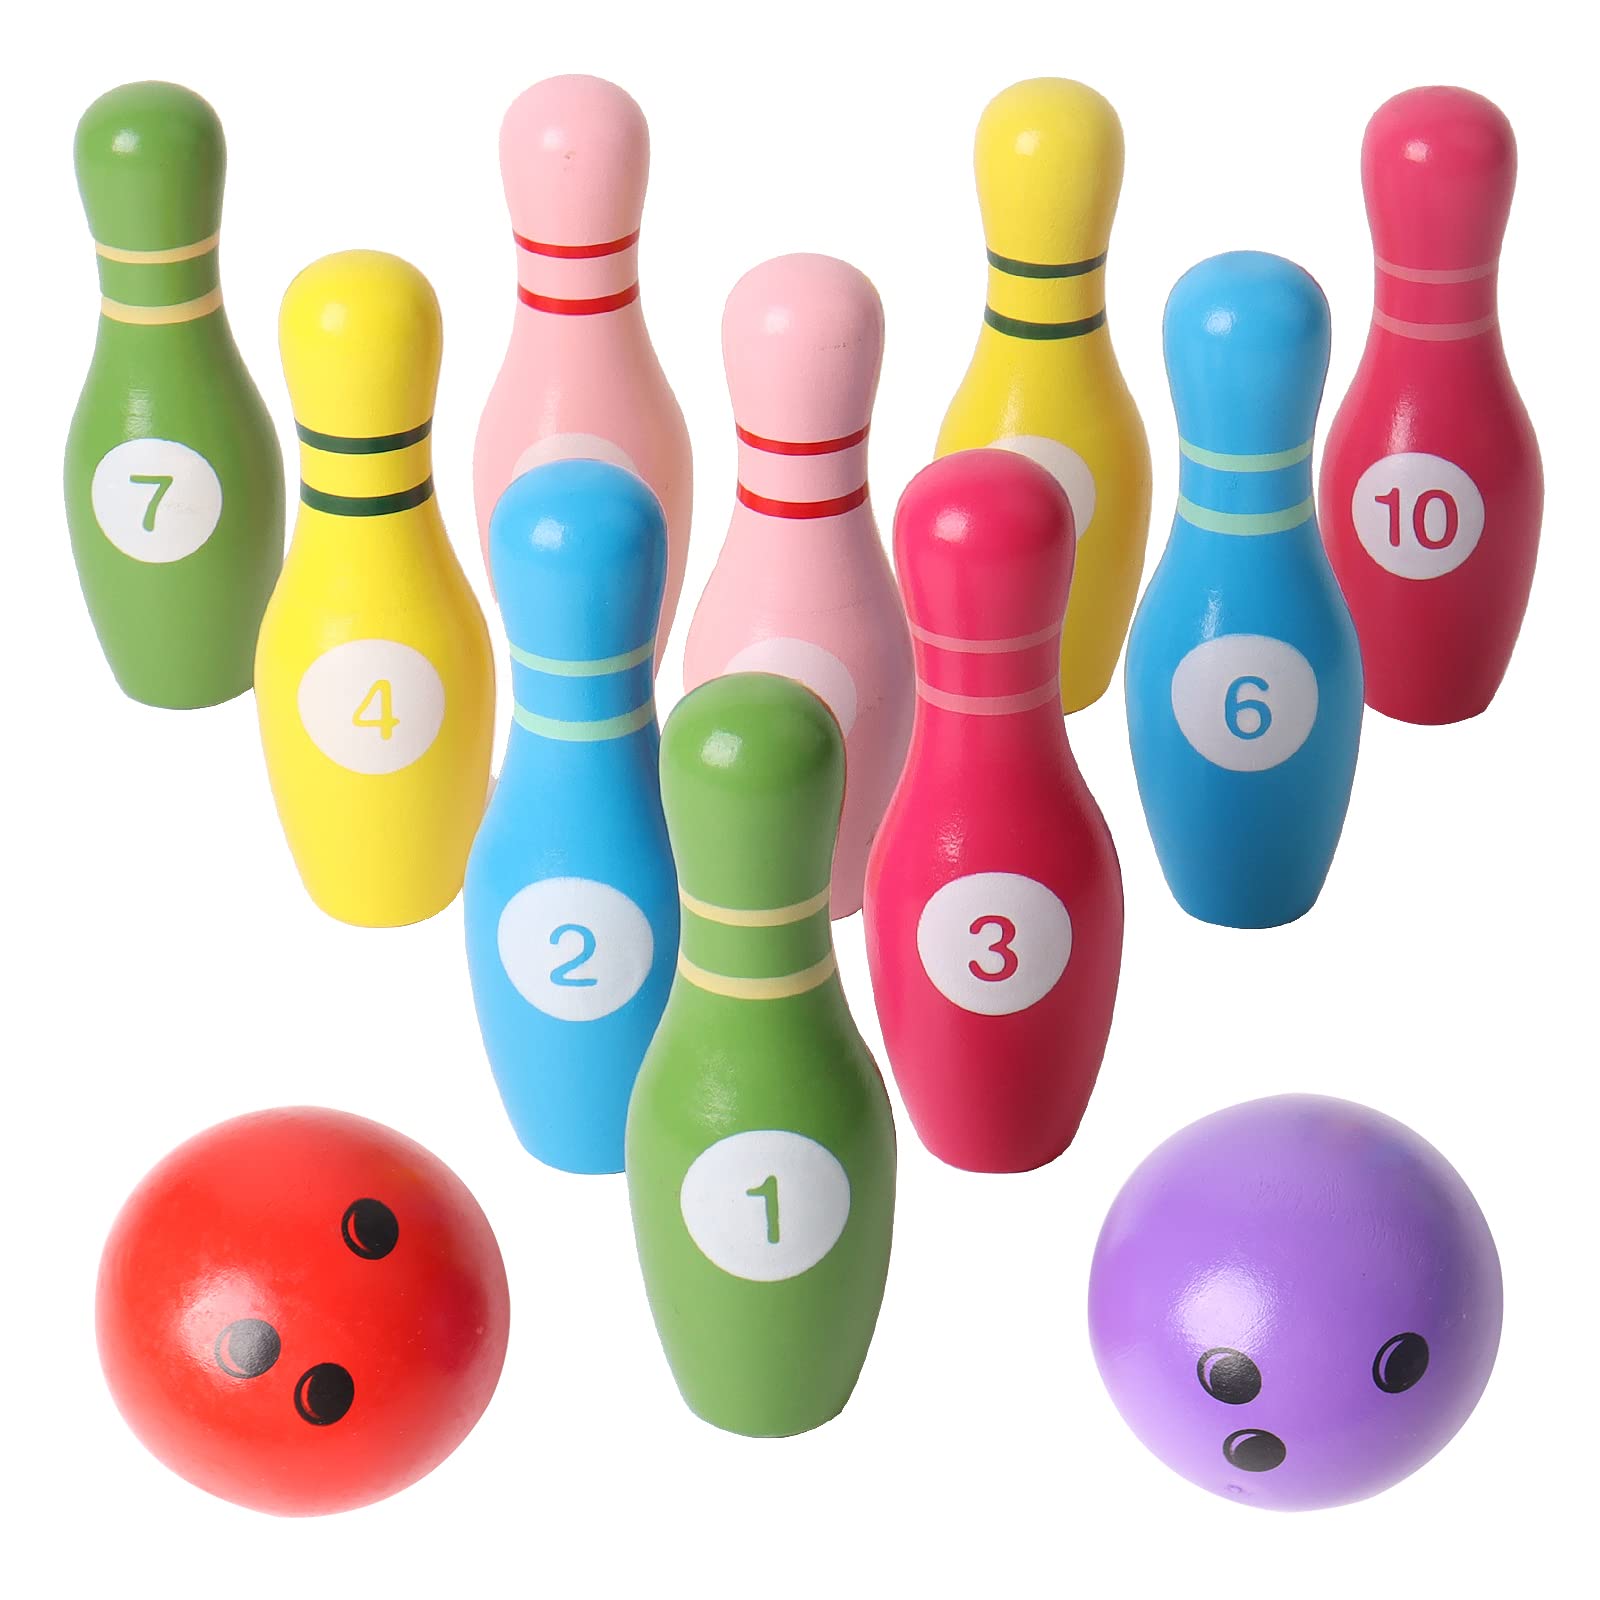 SHIERDU color Wooden Digital Bowling Toy, Suitable for Indoor and Outdoor Sports games for Toddlers, children and Adults, for Bo